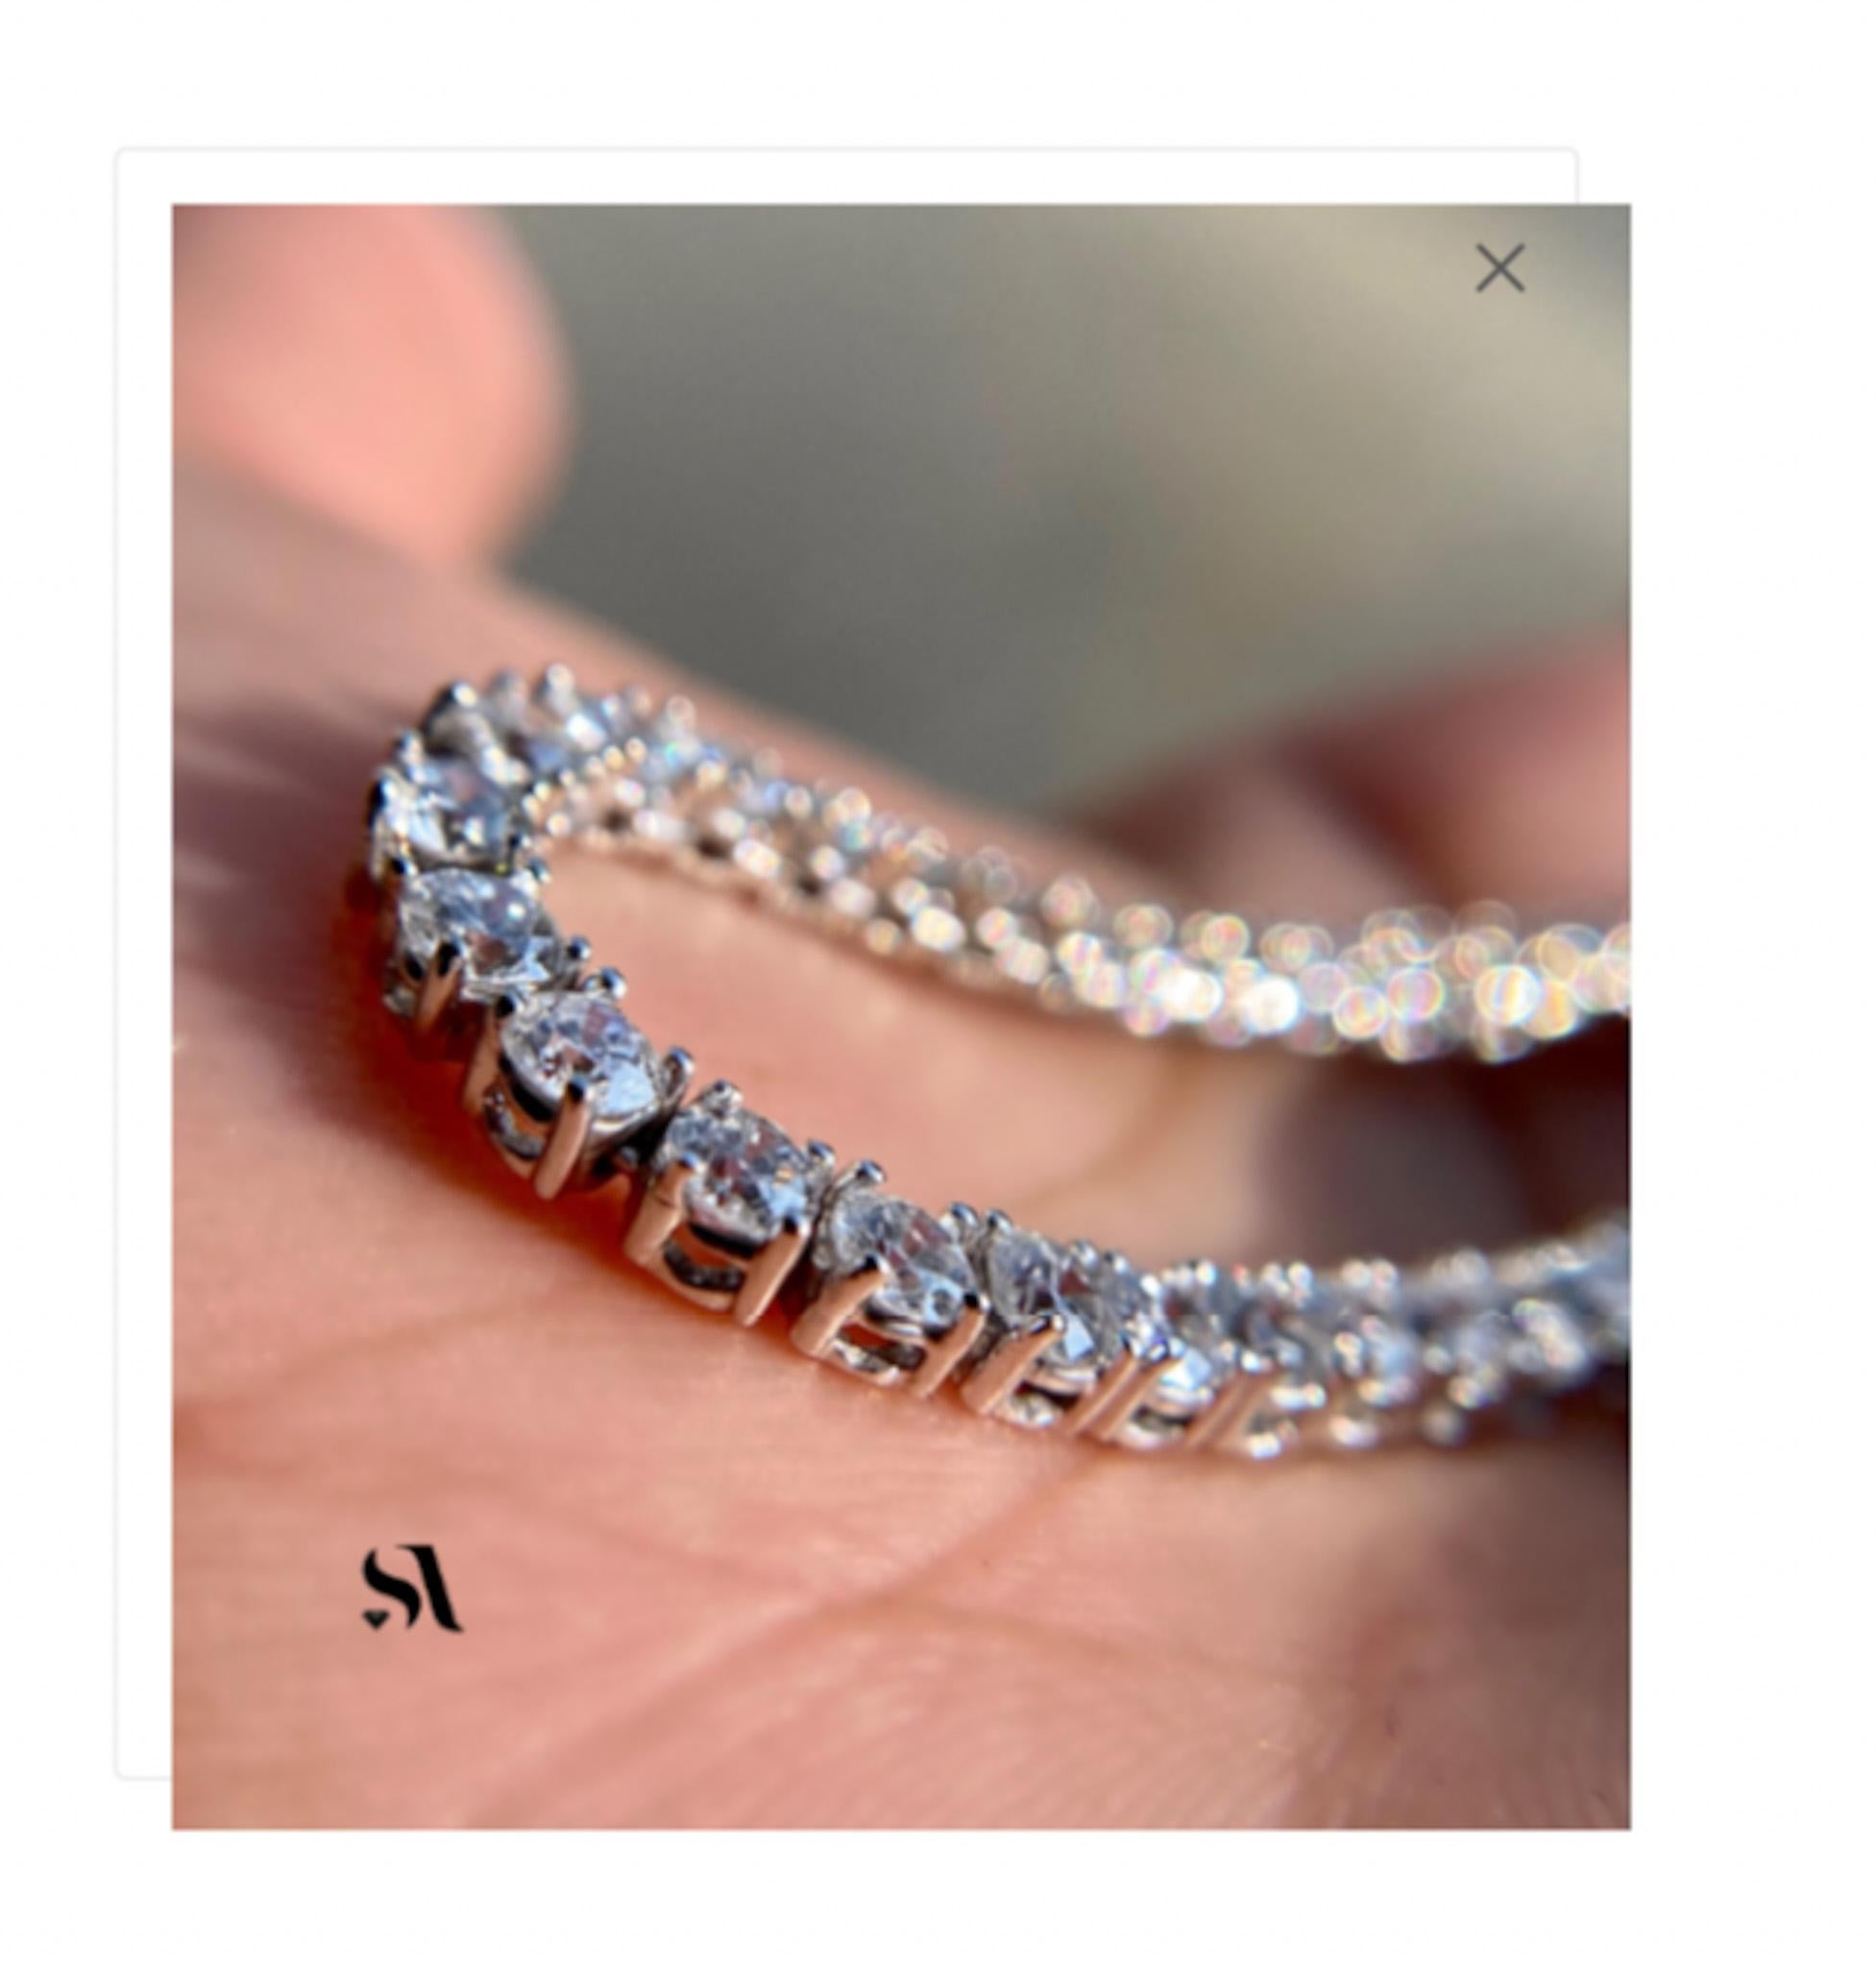 14K White Gold 5.10 ct Round Diamond Tennis Necklace

This is a beautiful and elegant diamond tennis necklace. It is made with 227 shimmering white diamonds. This tennis necklace is the perfect statement piece, and  can be worn in any occasion or